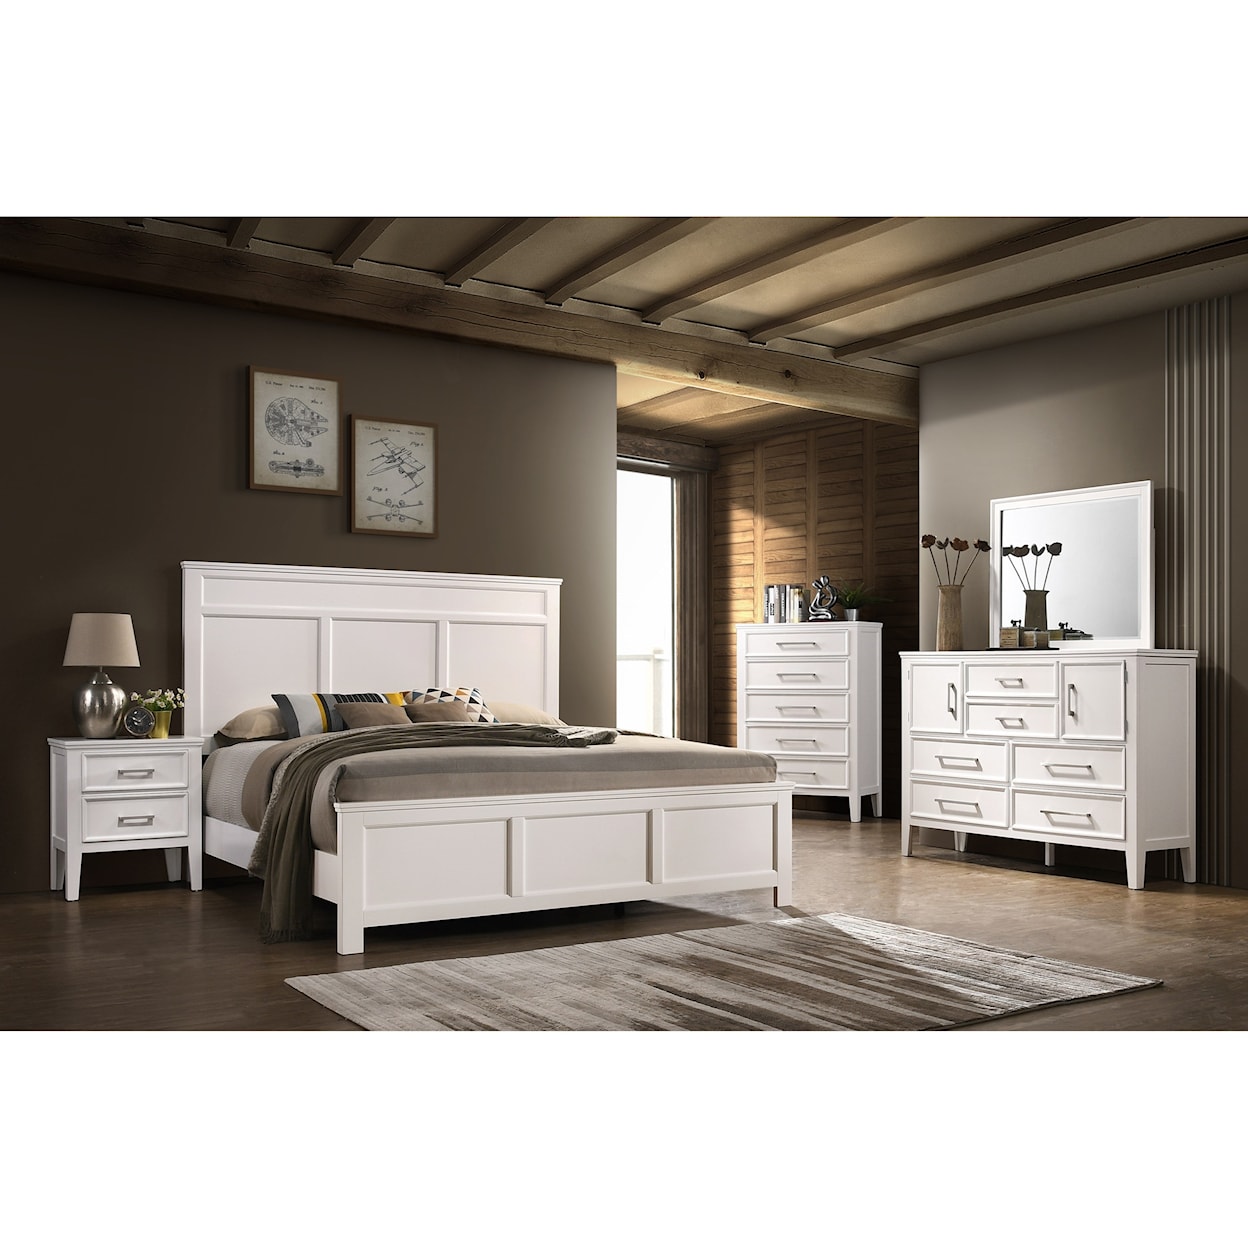 New Classic Furniture Andover Full Bedroom Group